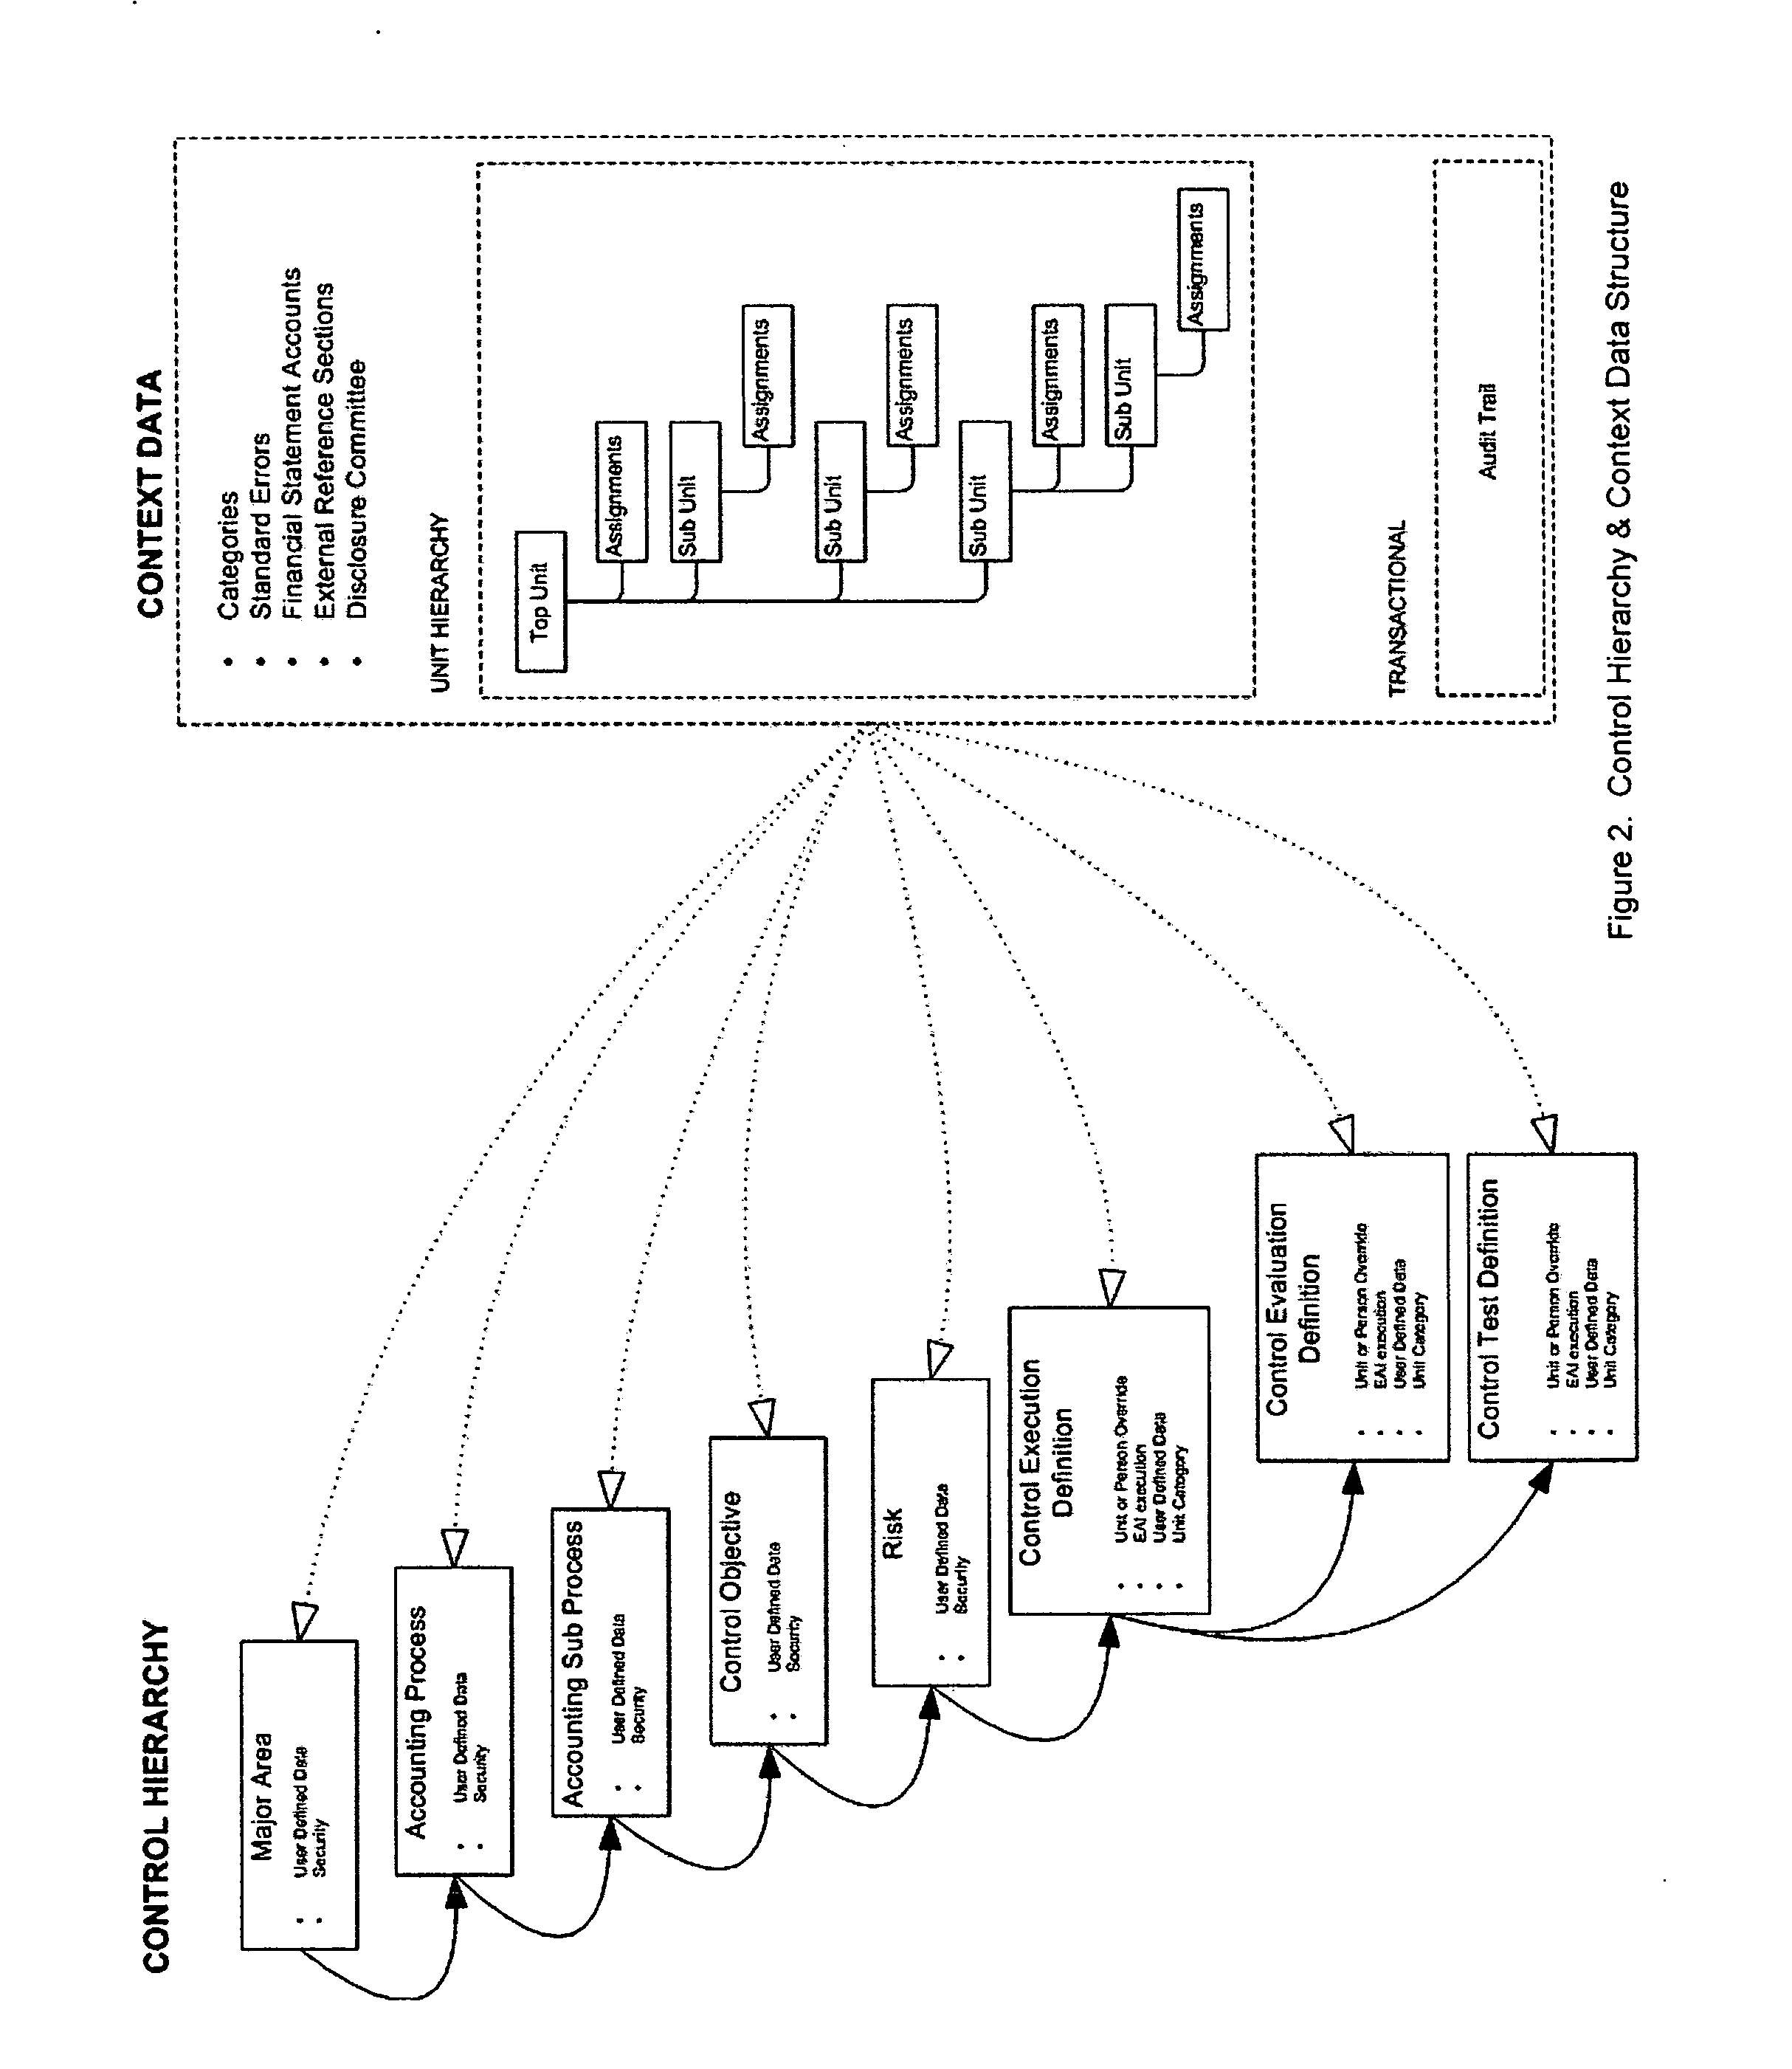 Apparatus, method, and system for documenting, performing, and attesting to internal controls for an enterprise